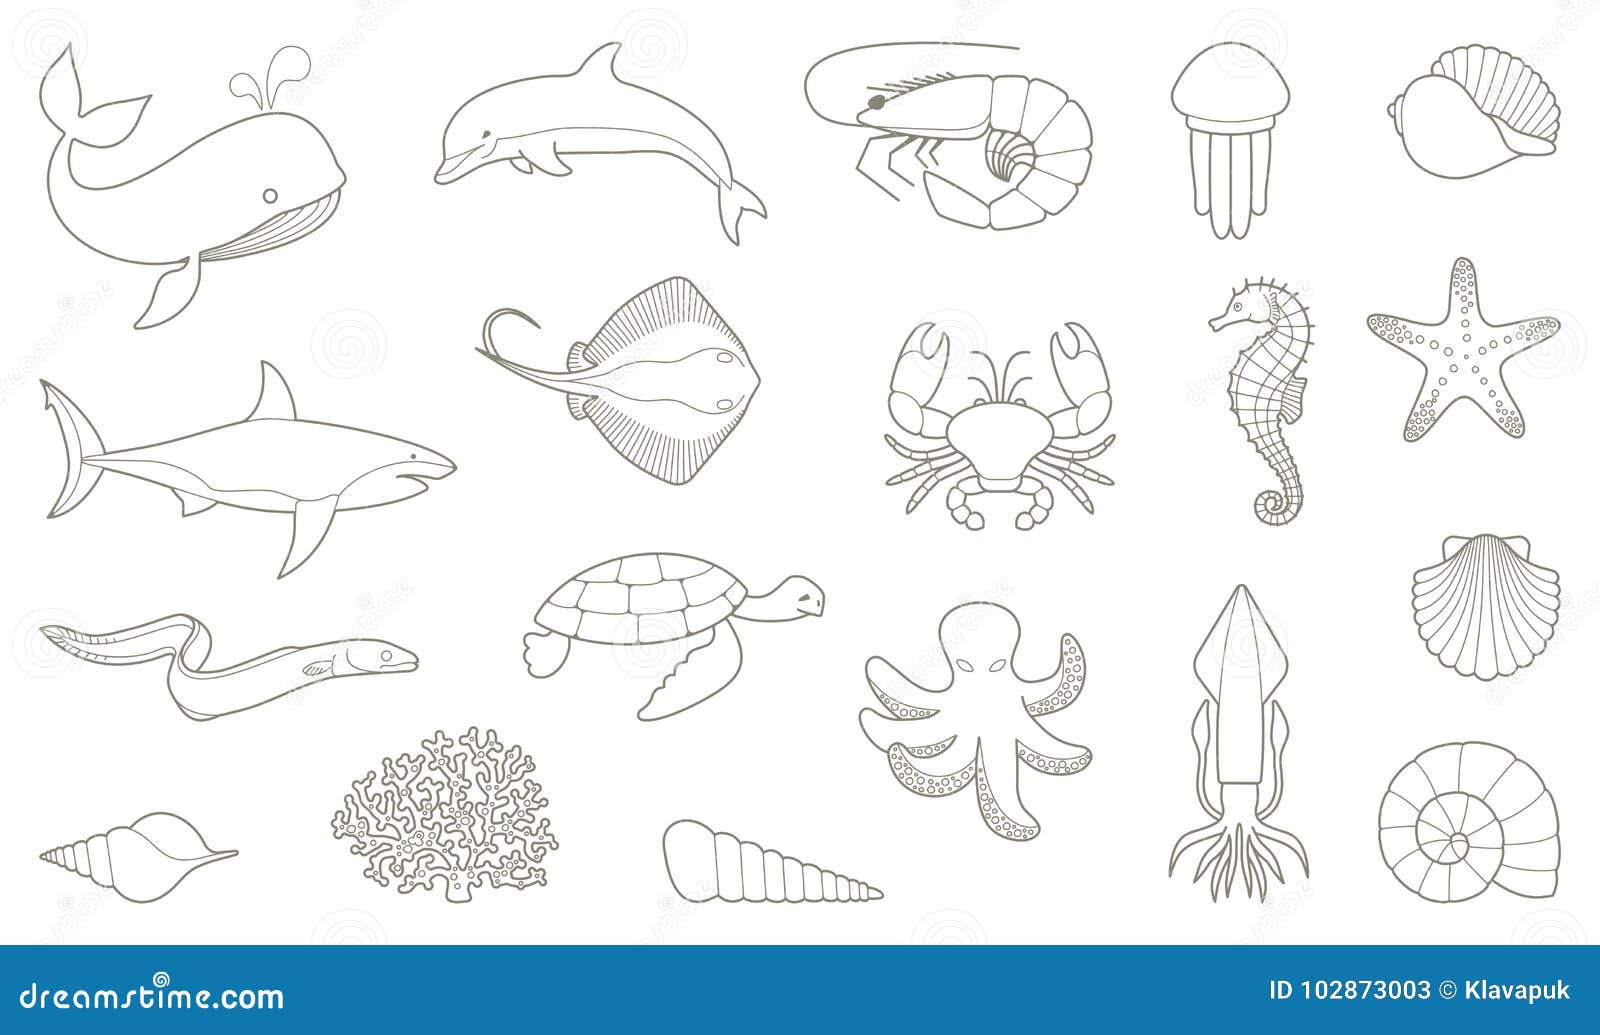 the outlines of fish and other sea creatures